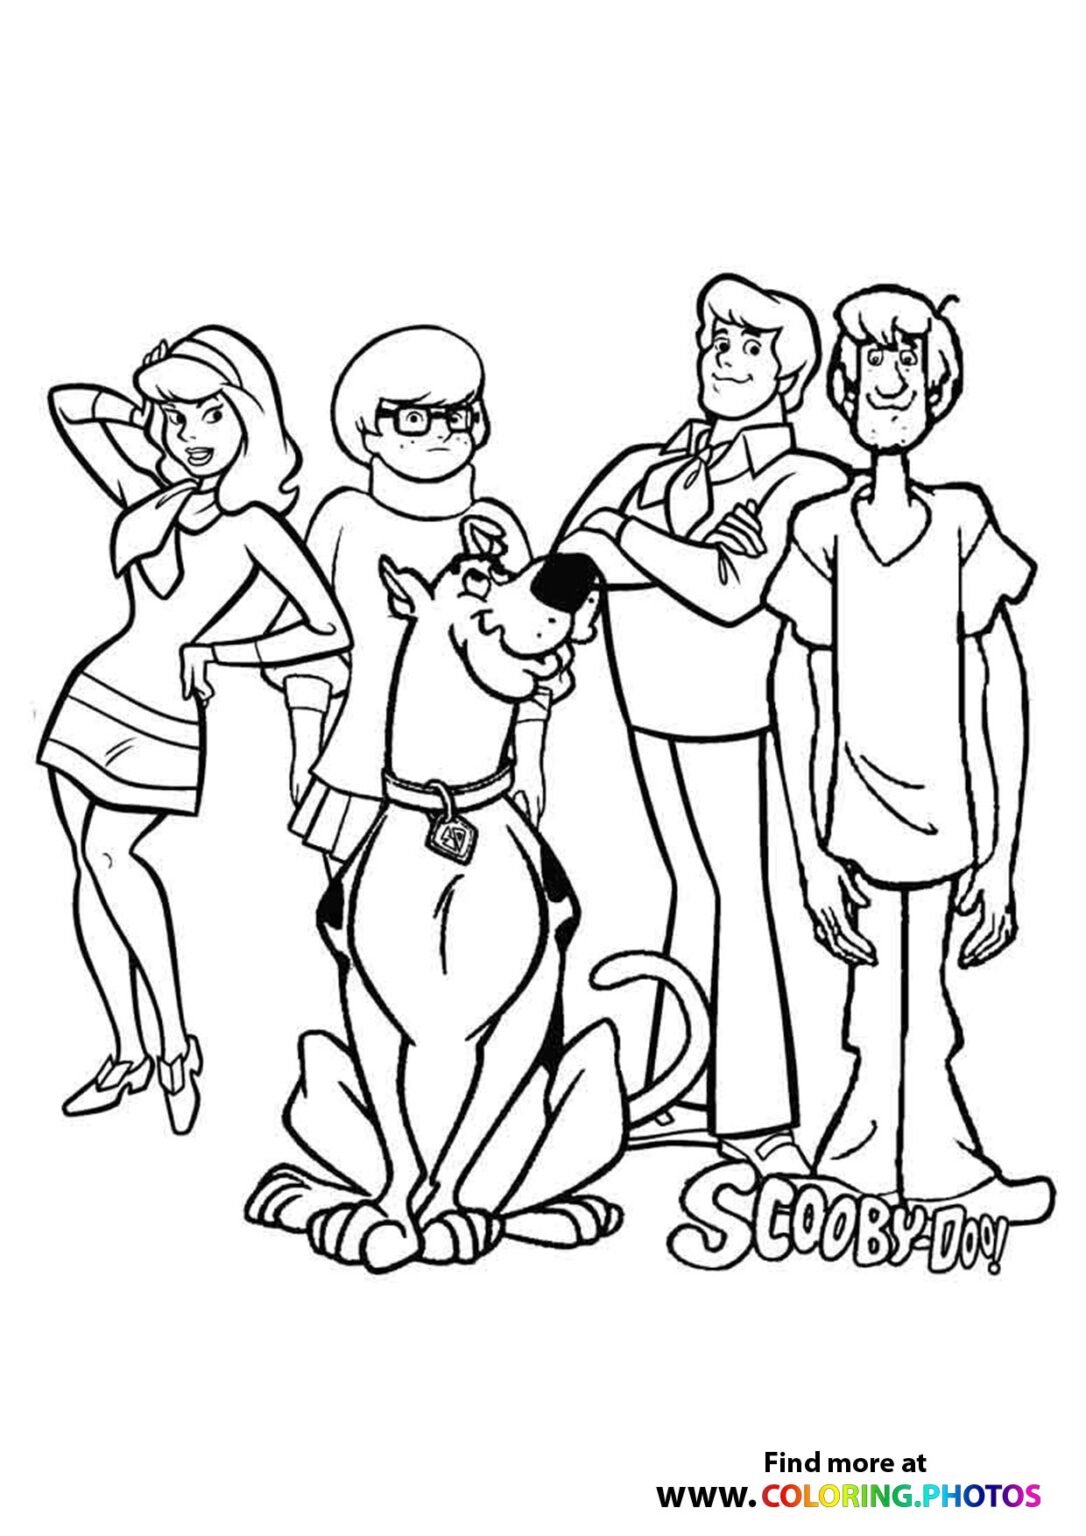 Scooby-Doo Gang - Coloring Pages for kids